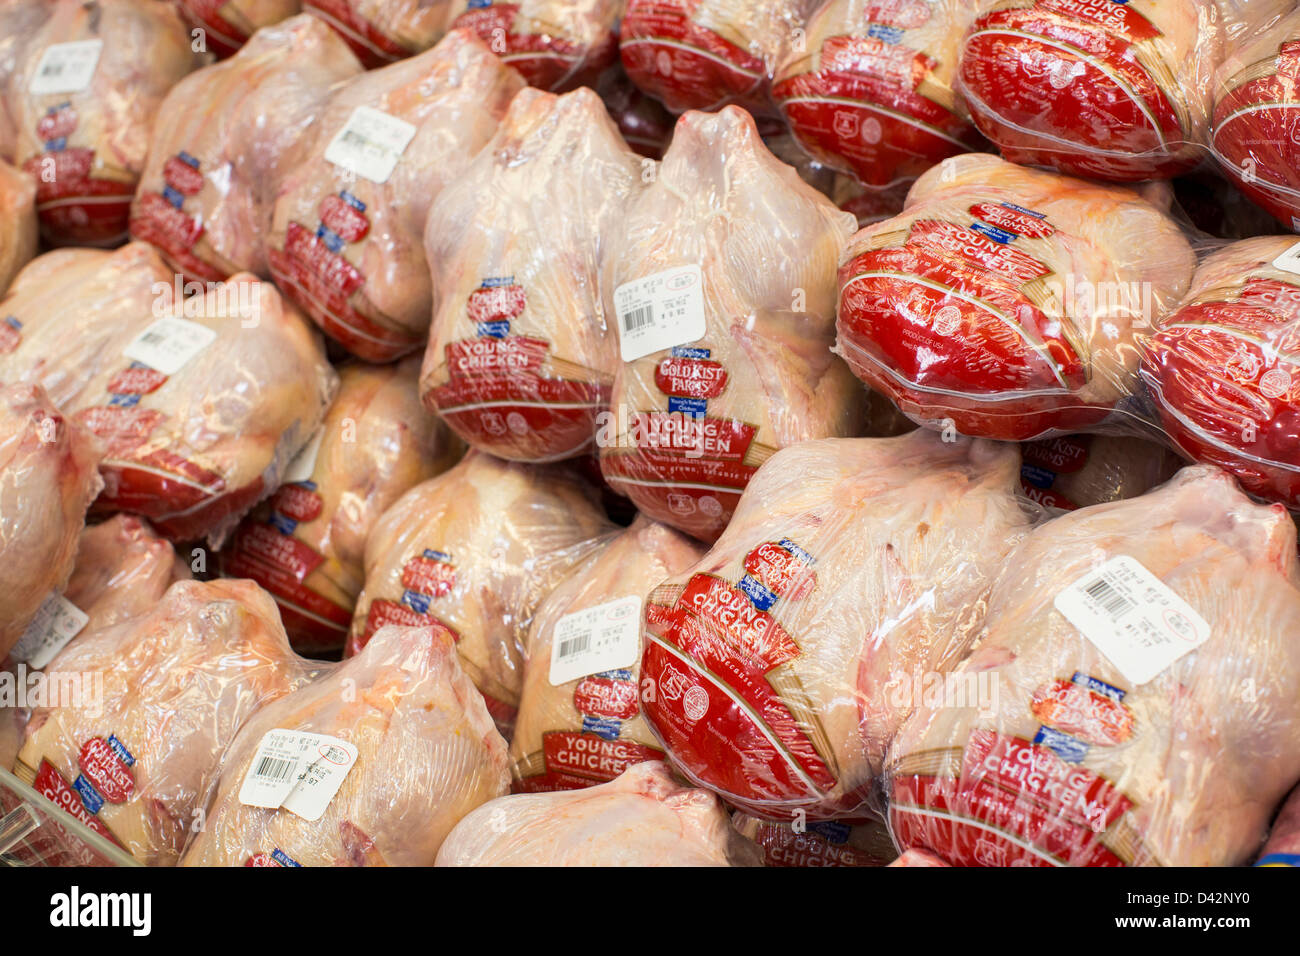 Whole chickens on display at a Costco Wholesale Warehouse Club. Stock Photo